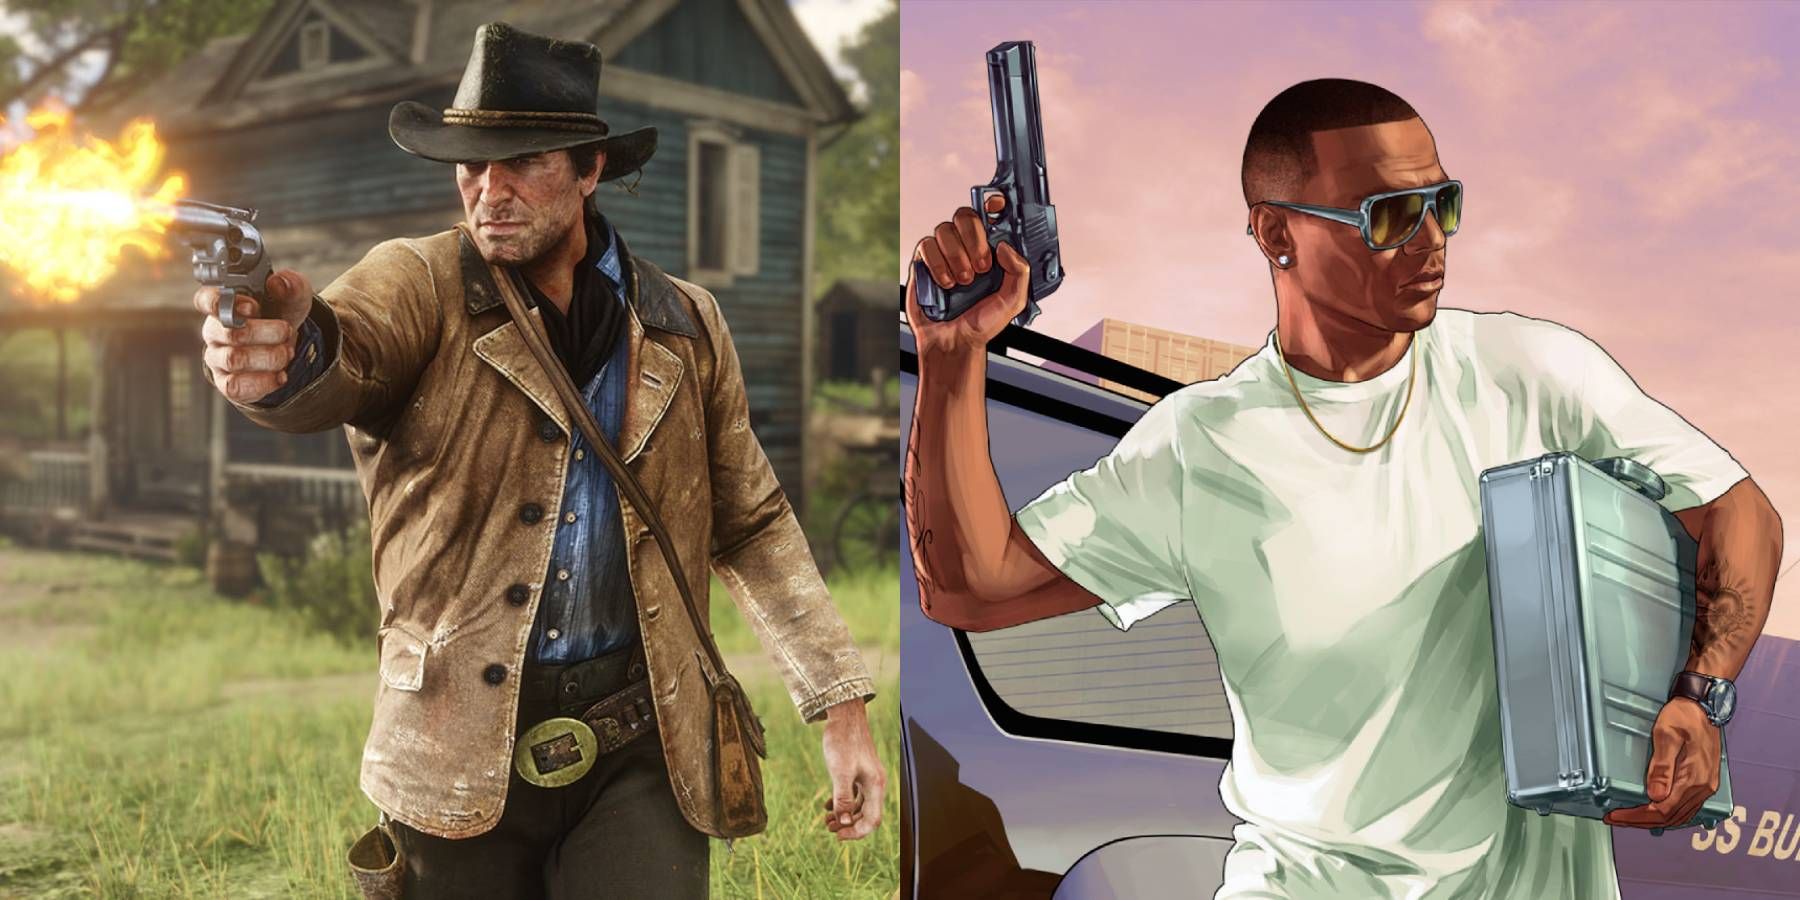 Arthur Morgan from Red Dead Redemption 2 and a character from Grand Theft Auto Online wielding guns